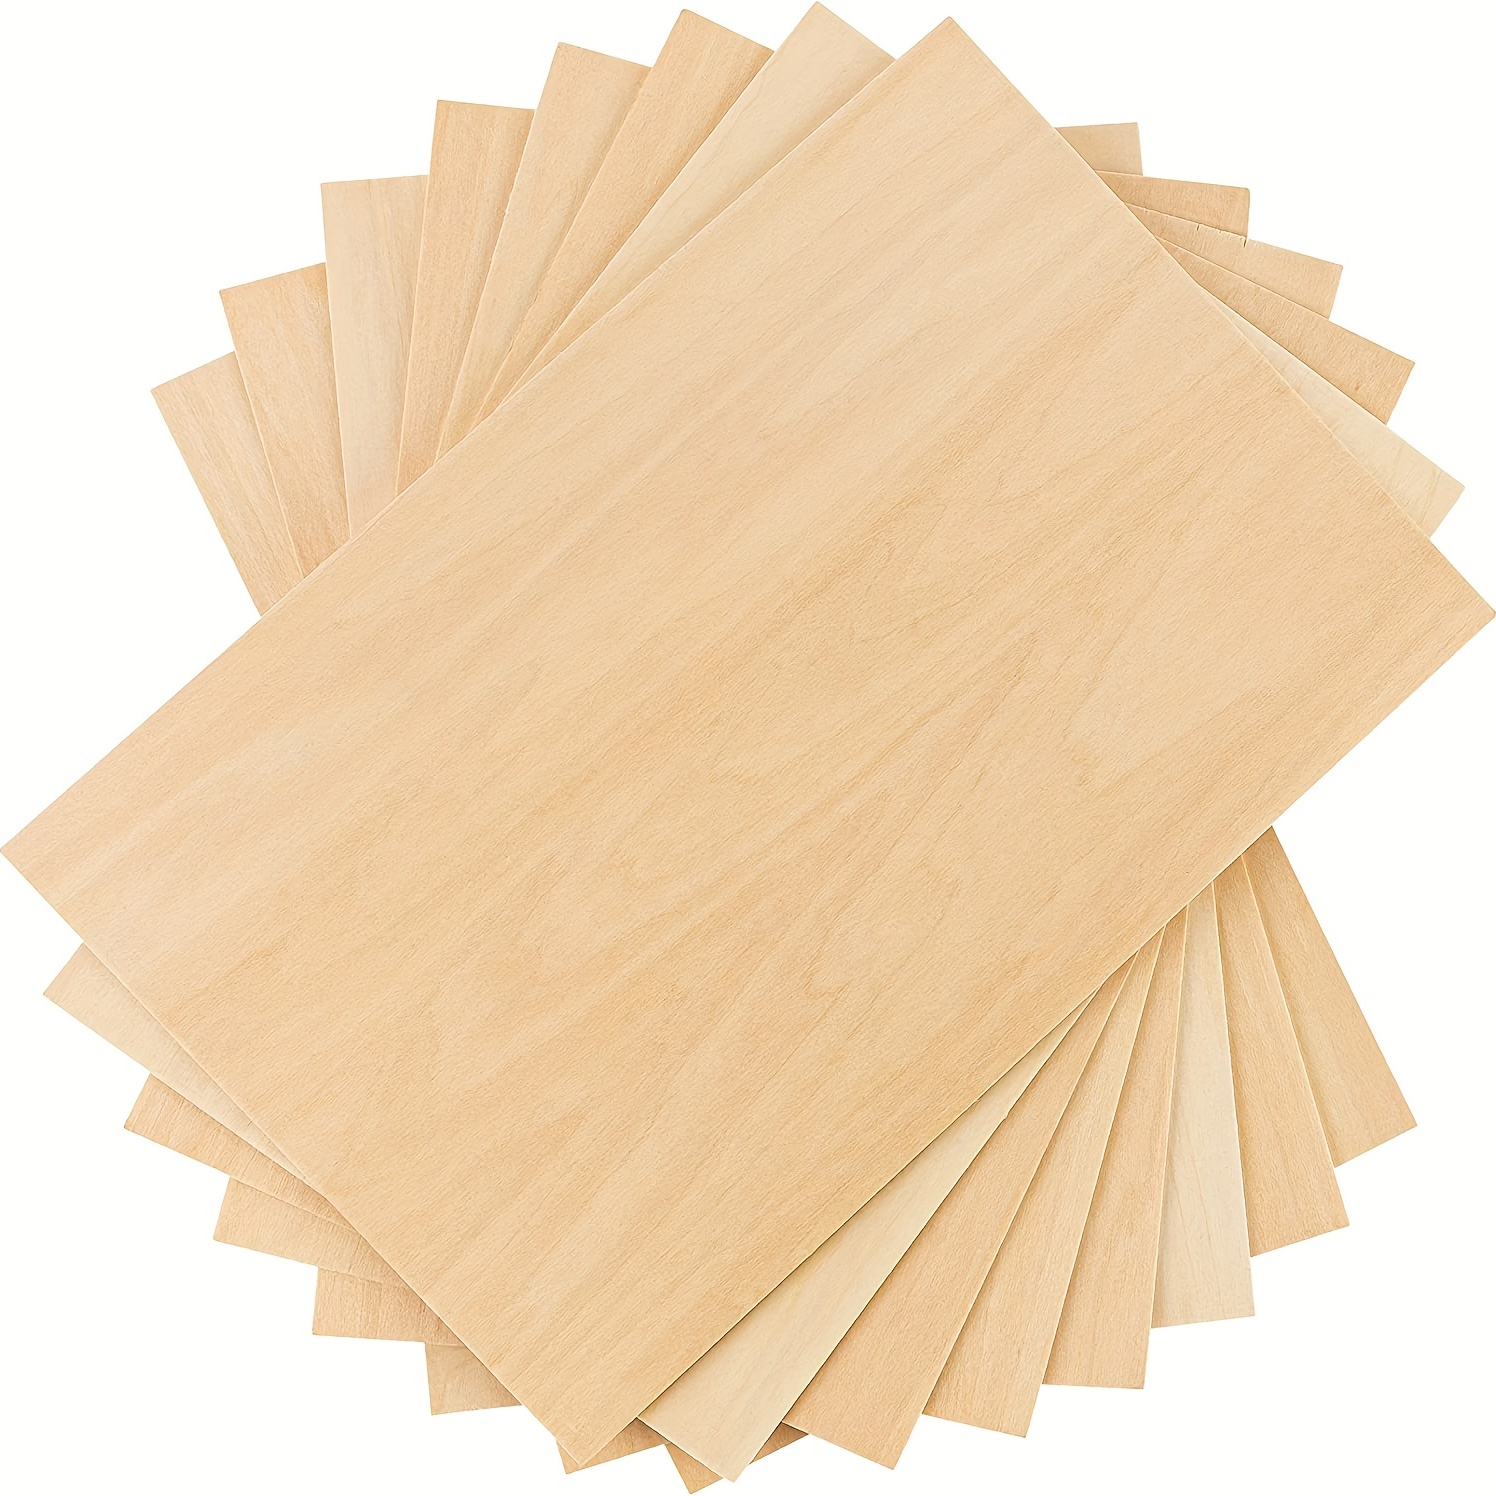  24 Pack Basswood Sheets for Crafts-8 x 12 x 1/16 Inch- 2mm  Thick Plywood Sheets with Smooth Surfaces-Unfinished Rectangular Wood Boards  for Laser Cutting, Wood Burning, Architectural Models, Staining